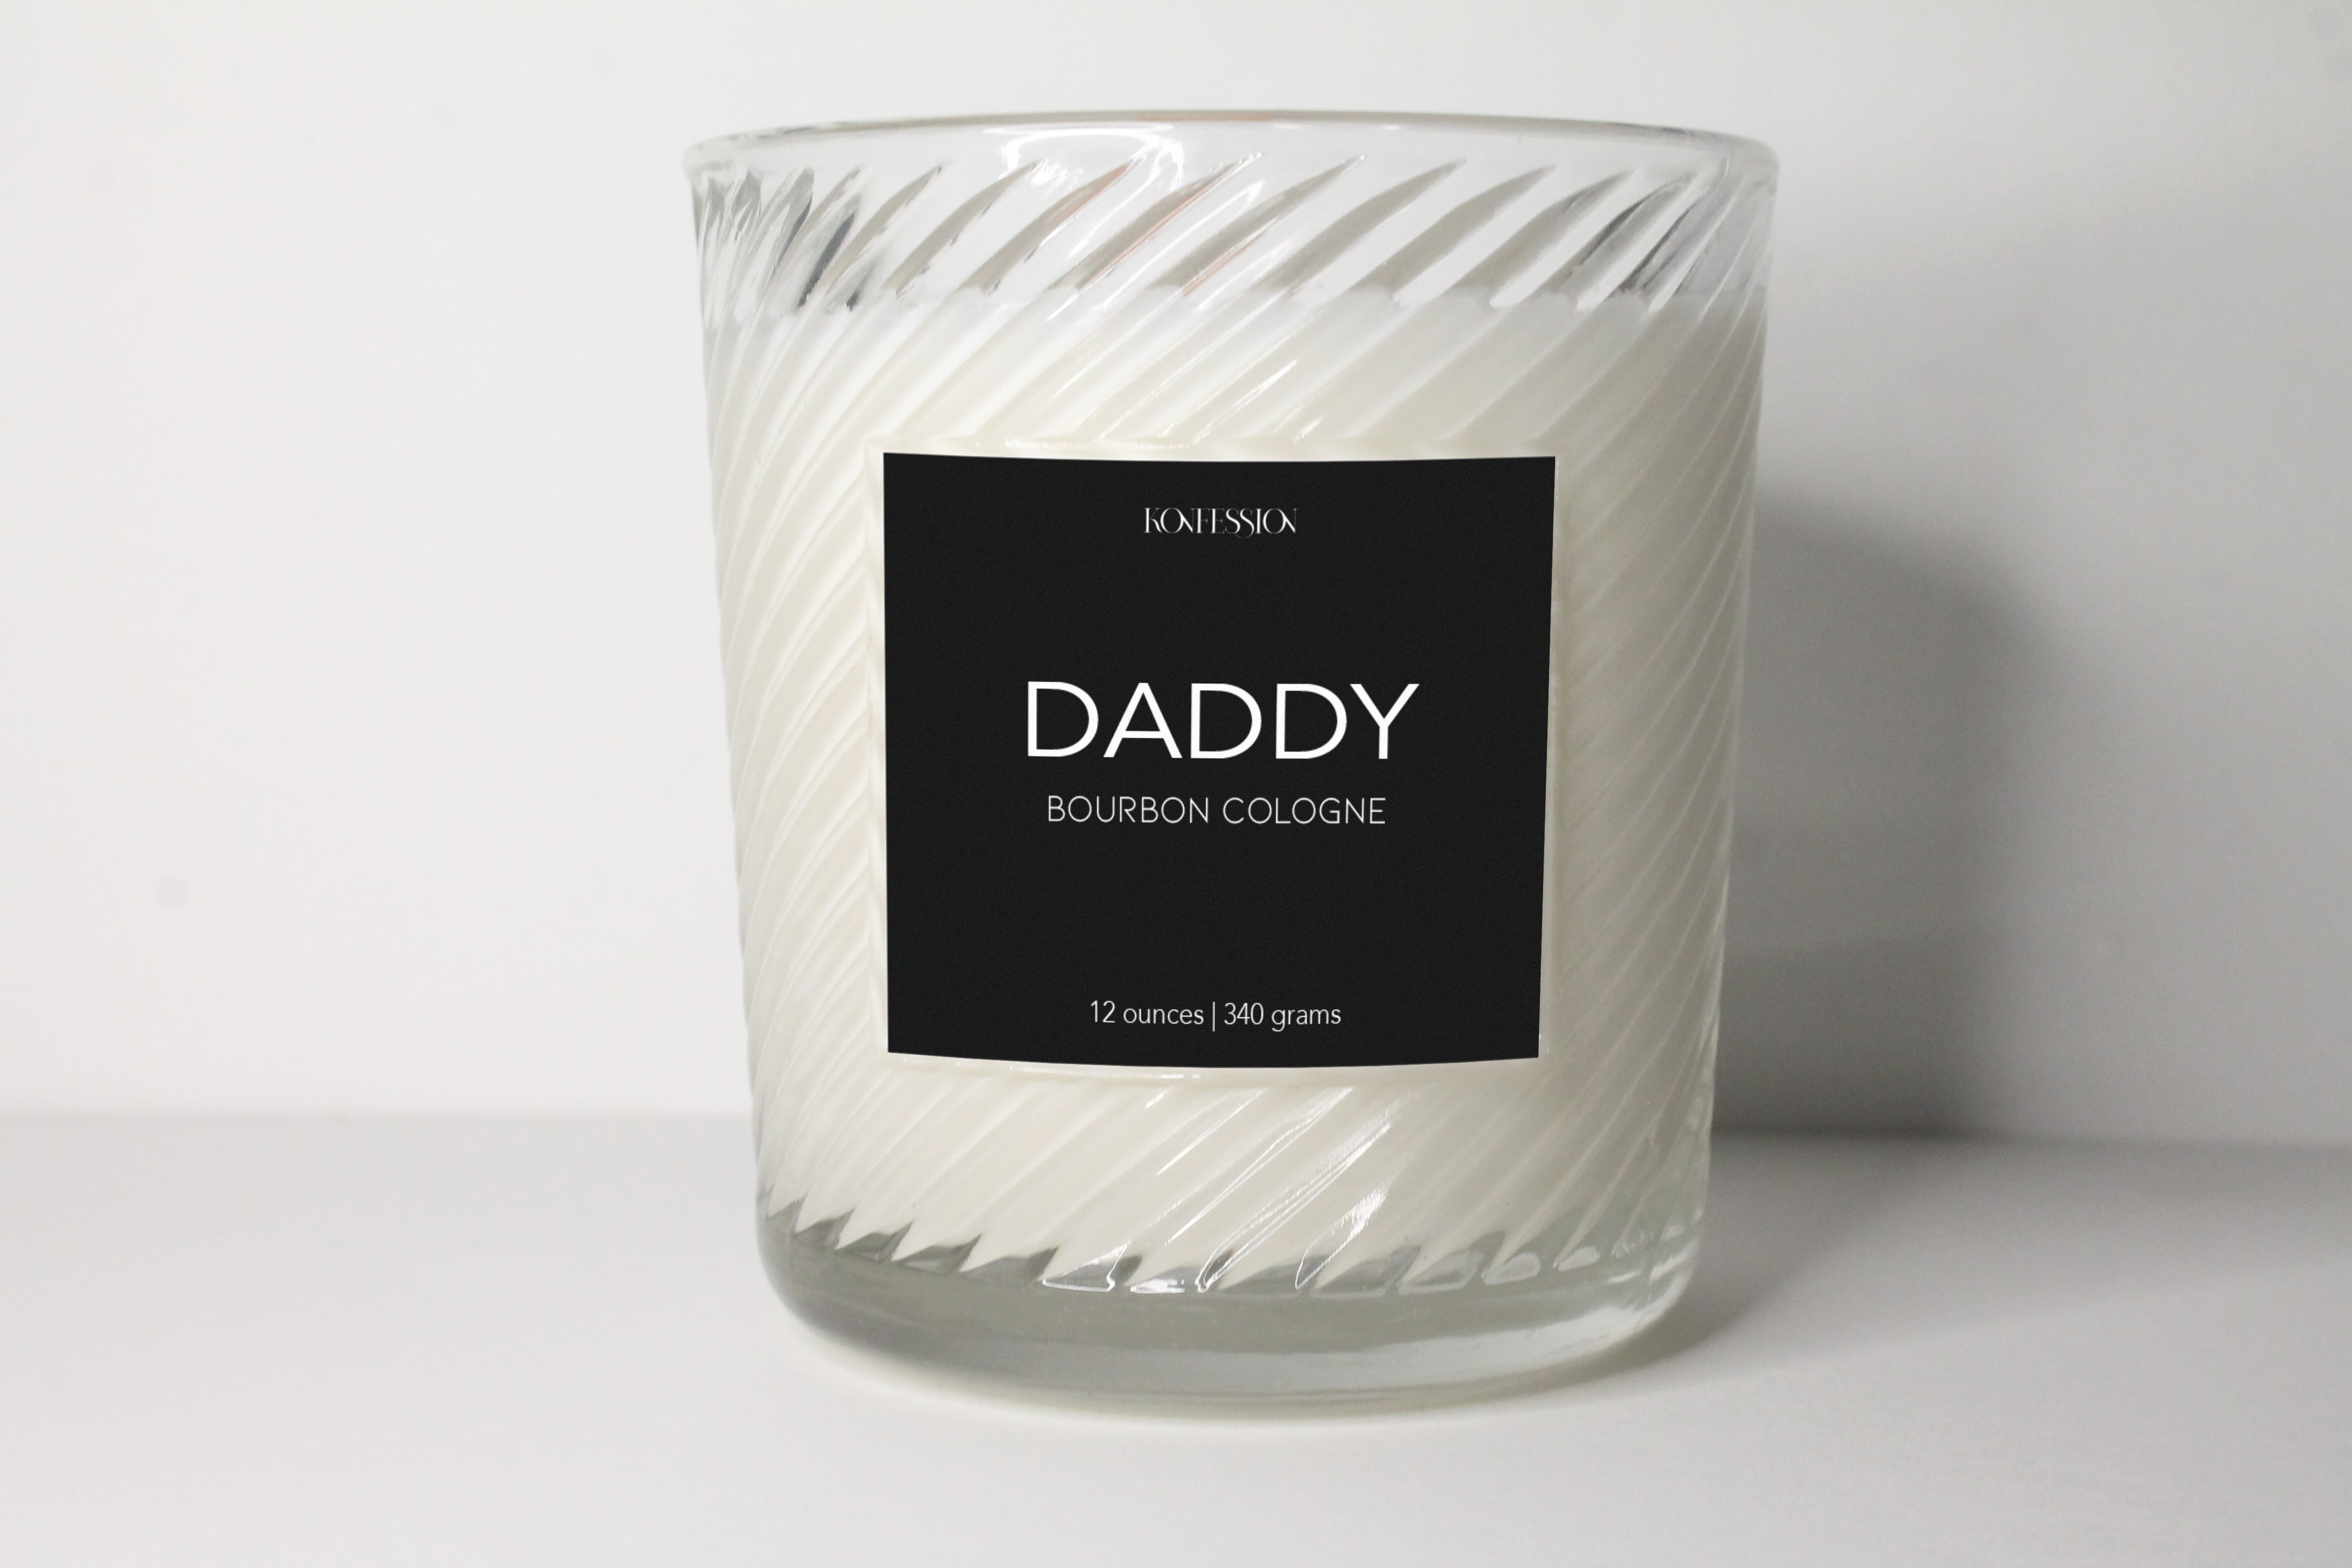 Made with 100% natural soy wax. The candle is packaged in a clear ribbed glass vessel with a black lable and white writing.